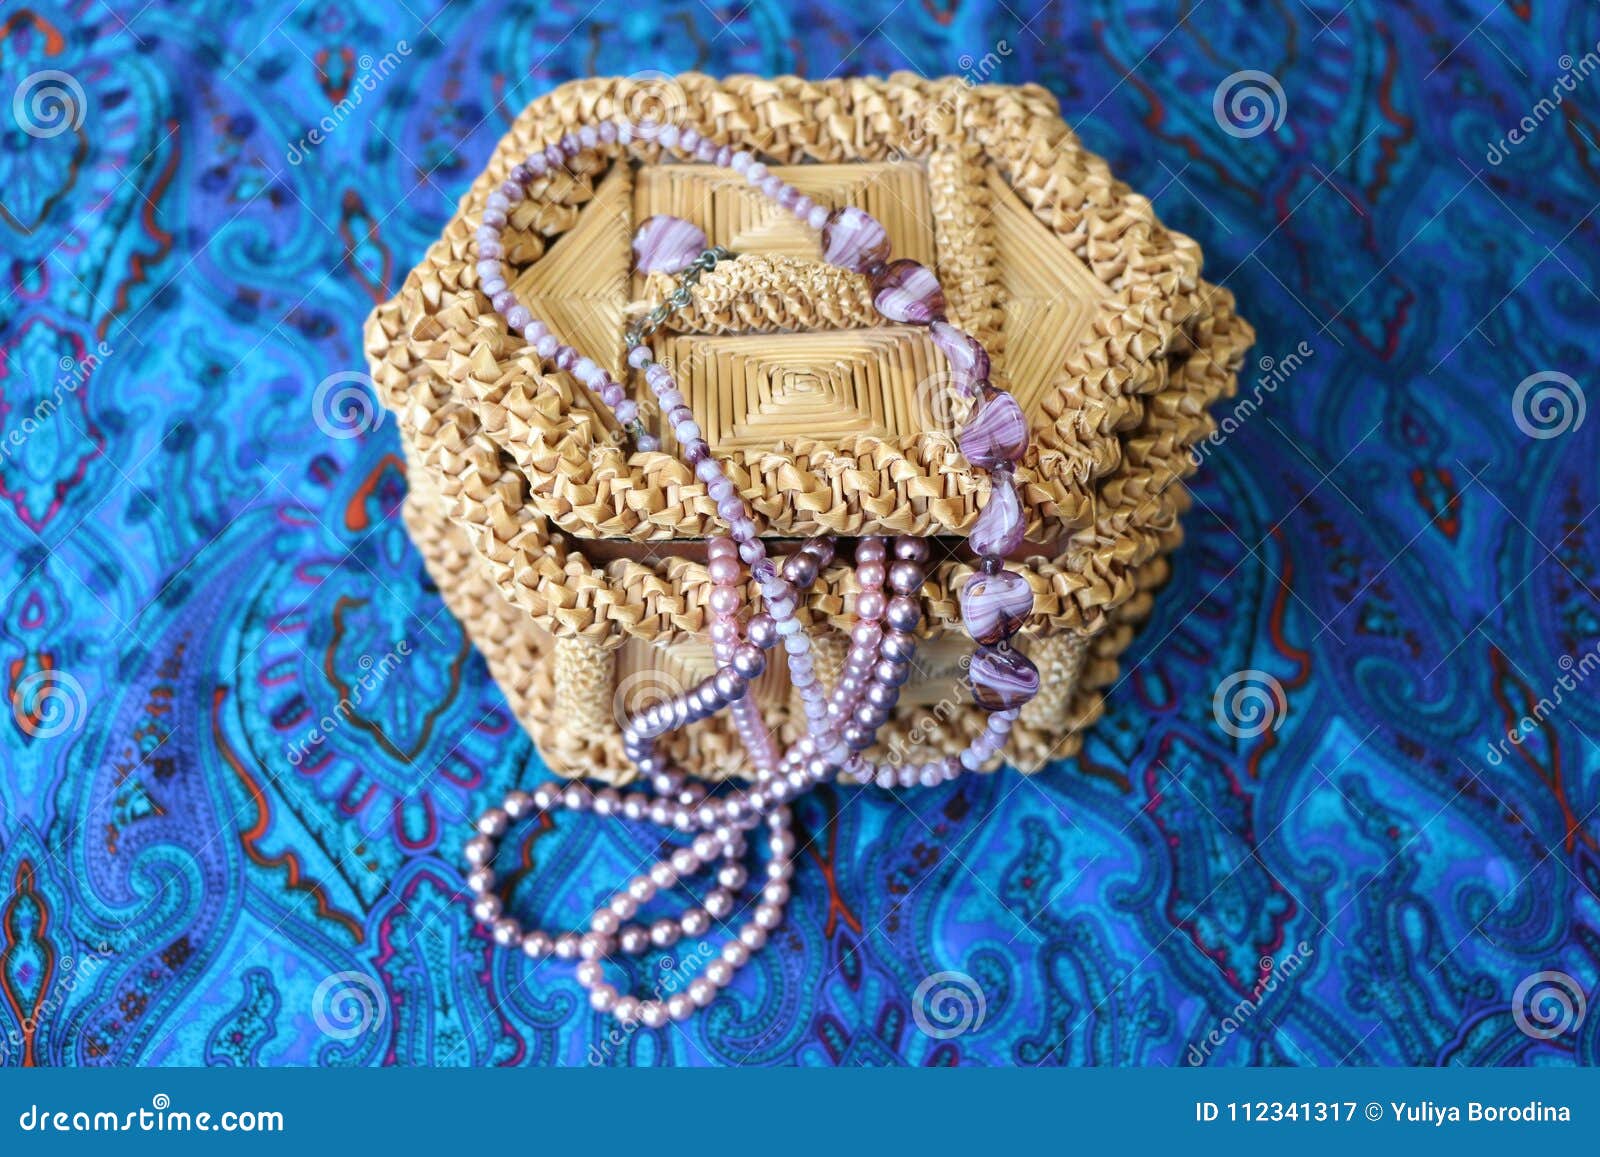 Straw Box for Jewelry with Beads Stock Image - Image of jewelry, rose ...